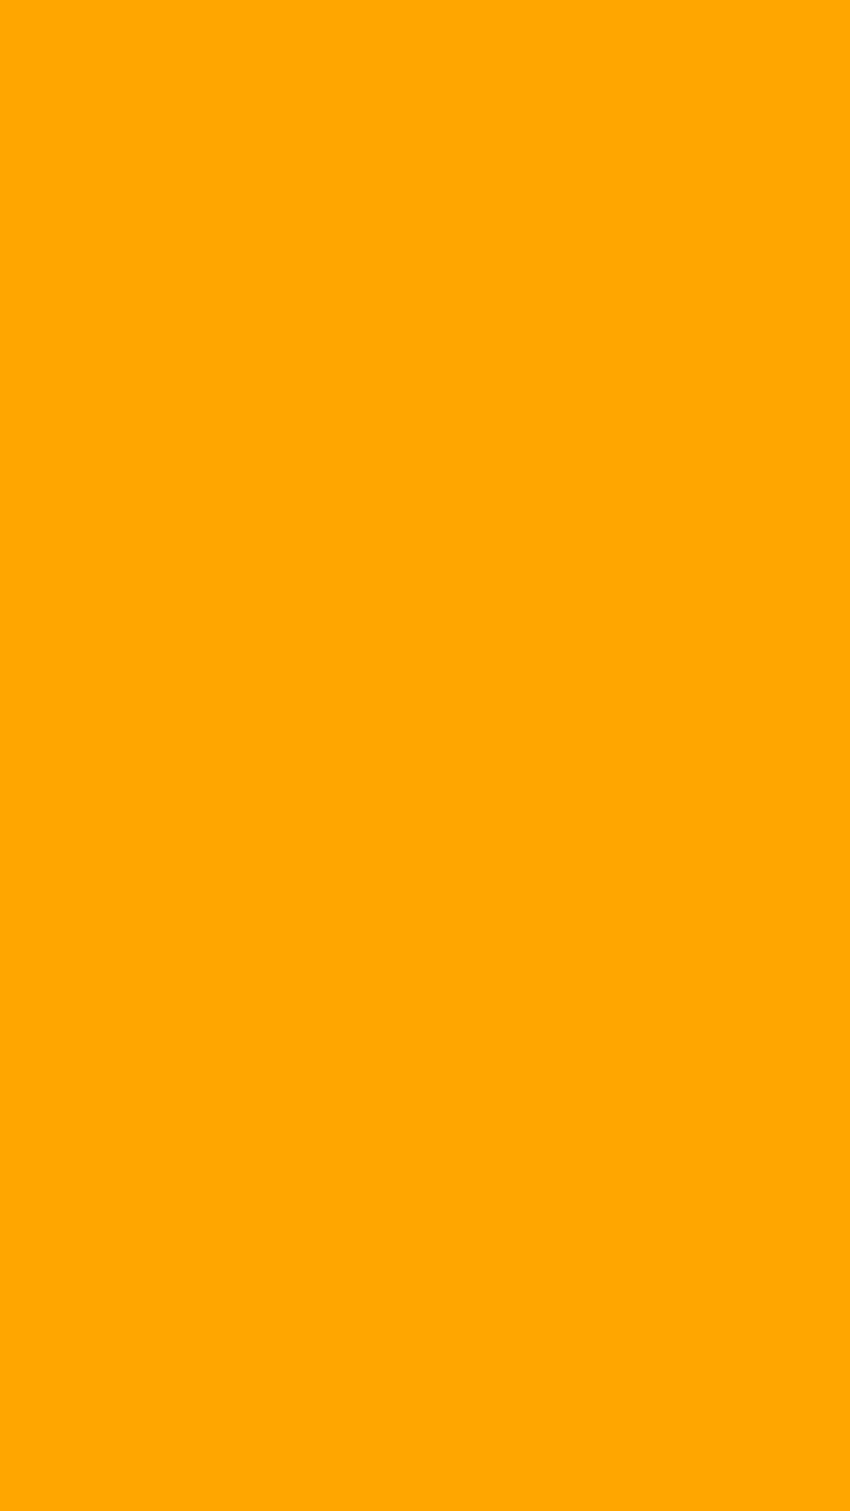 Chrome Yellow Solid Color Backgrounds for Mobile Phone, plain yellow HD phone wallpaper